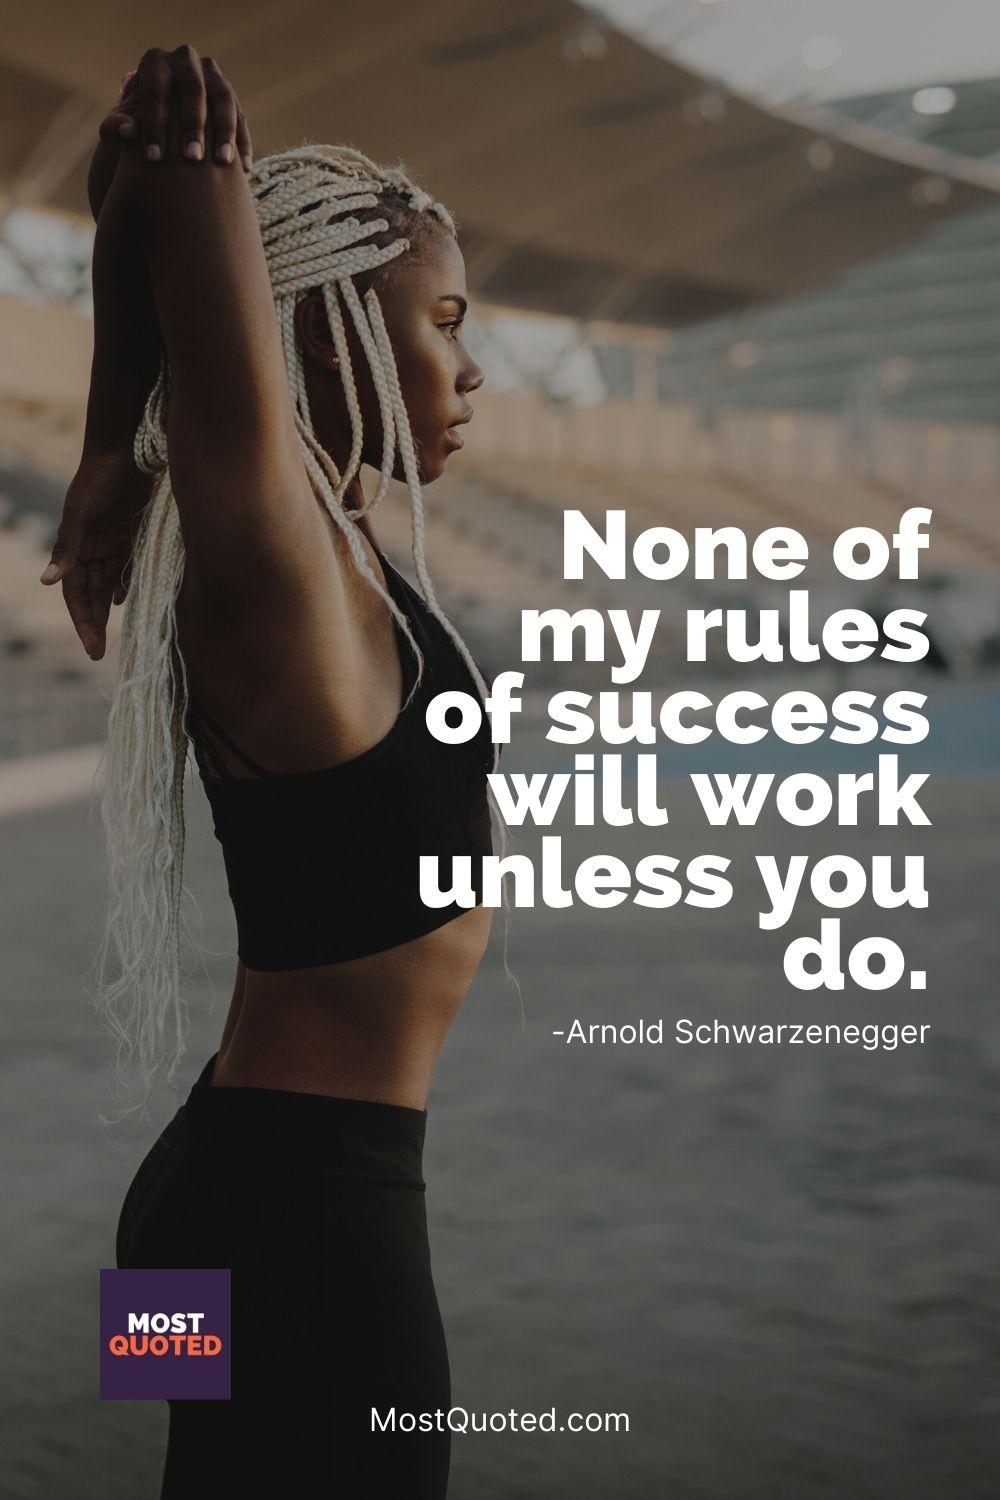 None of my rules of success will work unless you do. - Arnold Schwarzenegger